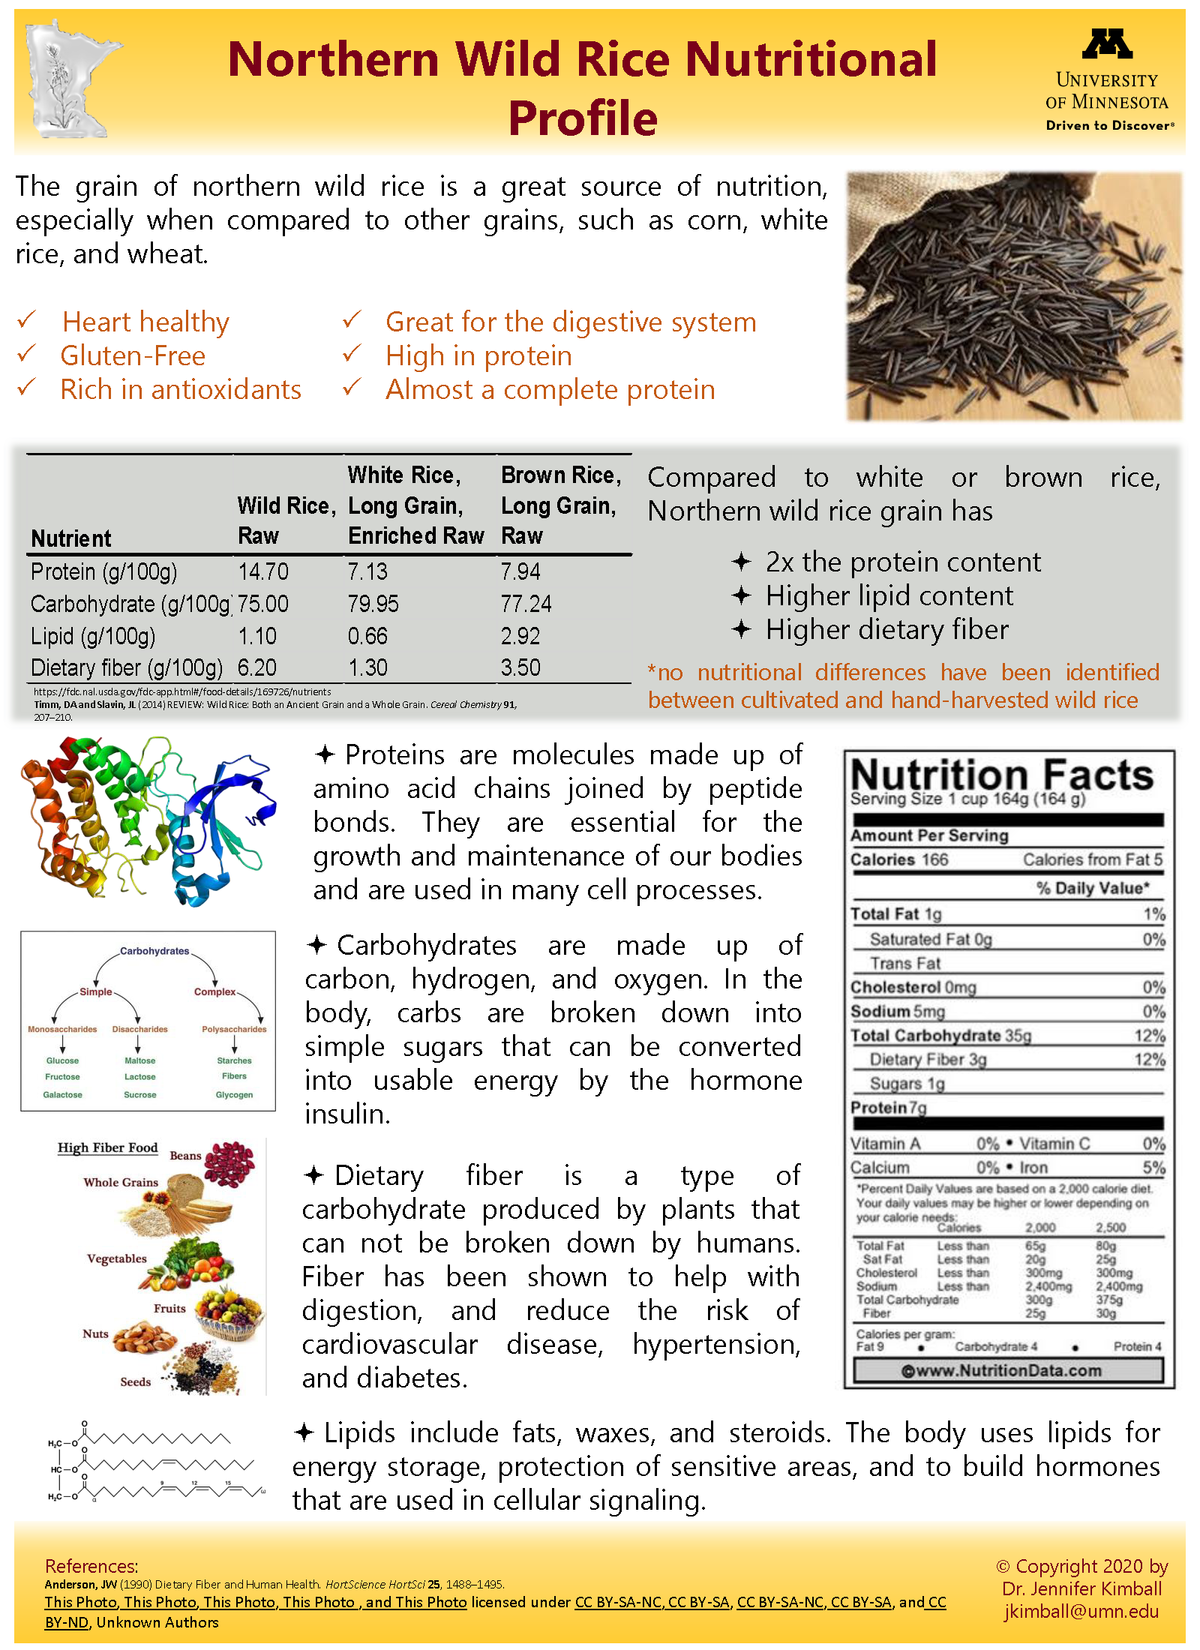 Nutritional information about wild rice including protein, carbohydrate, and fiber content